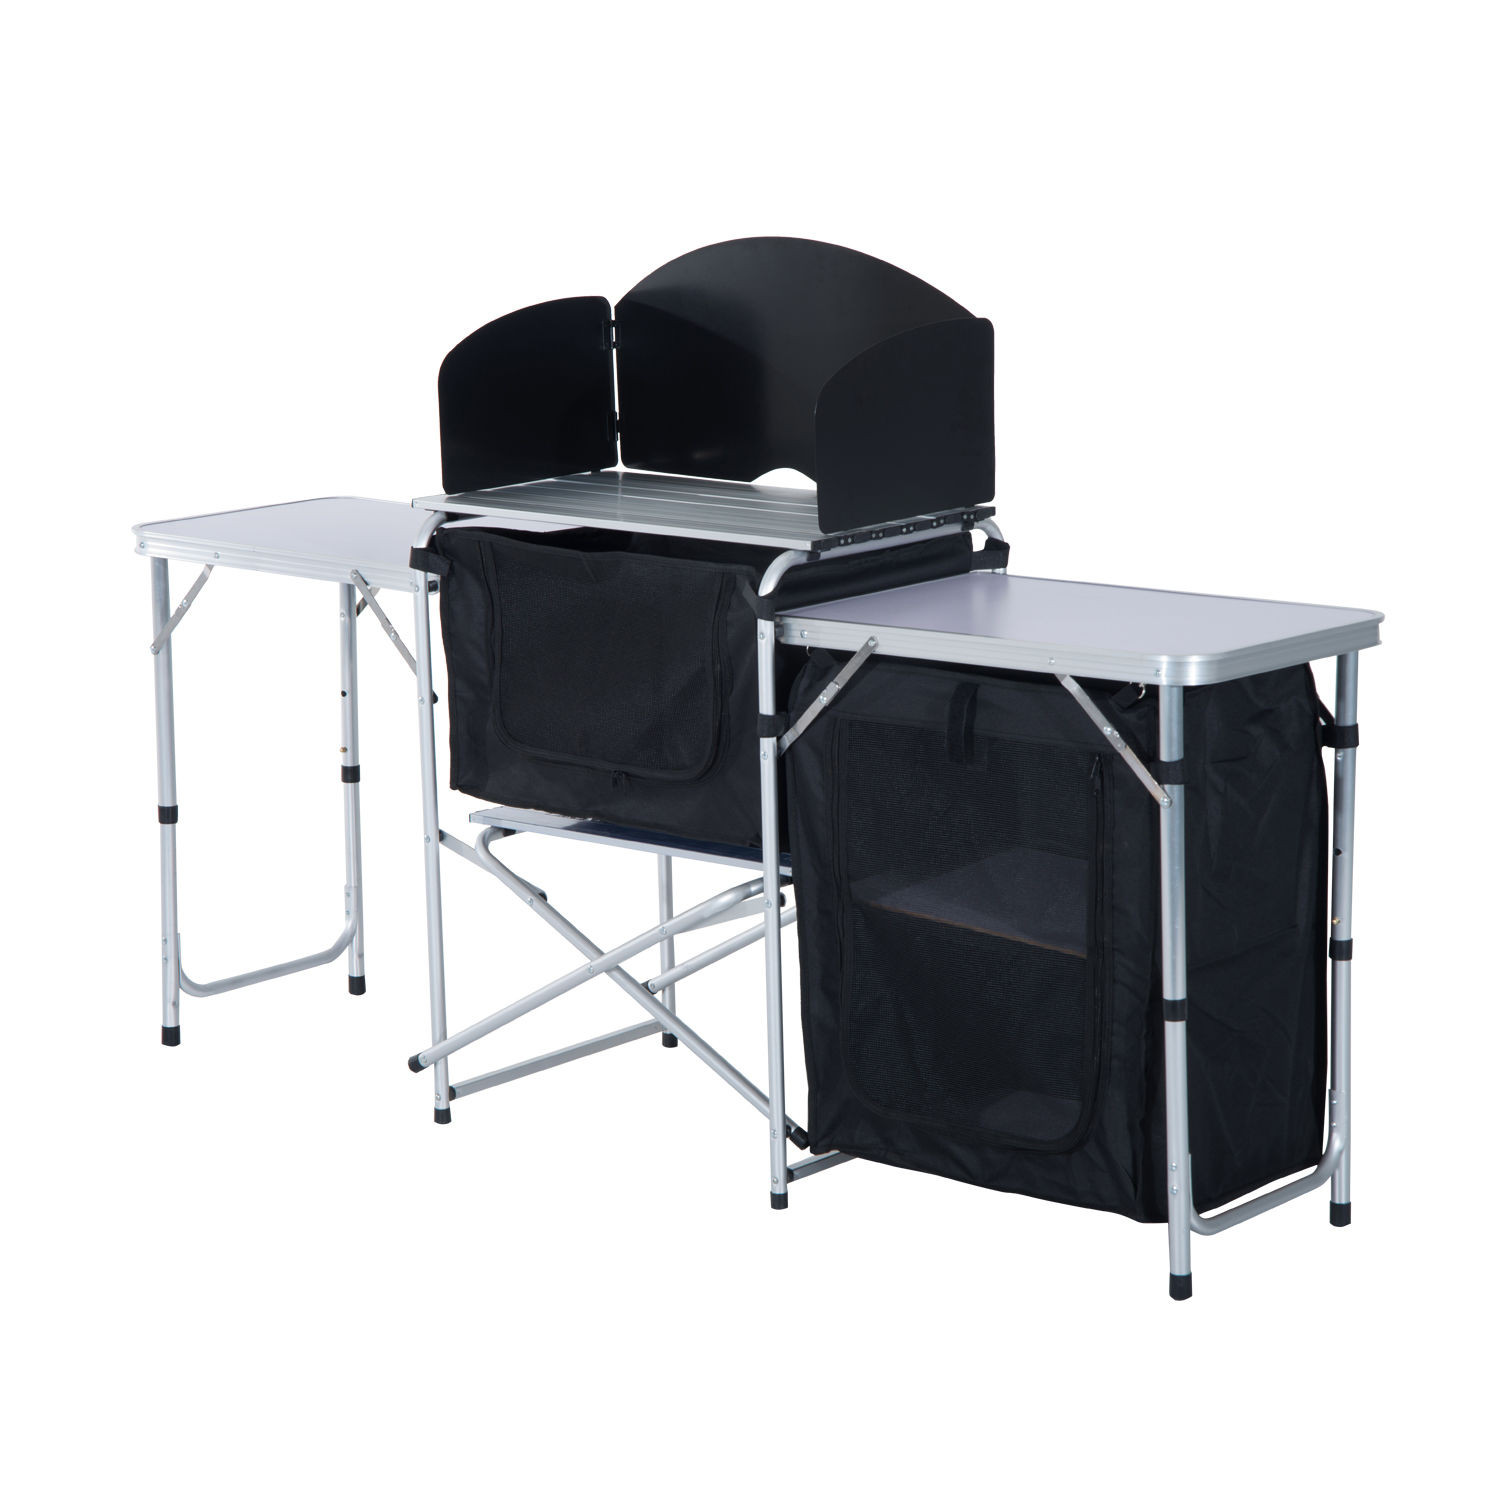 Portable Outdoor Kitchens
 6 Portable Fold Up Camp Kitchen with Windscreen